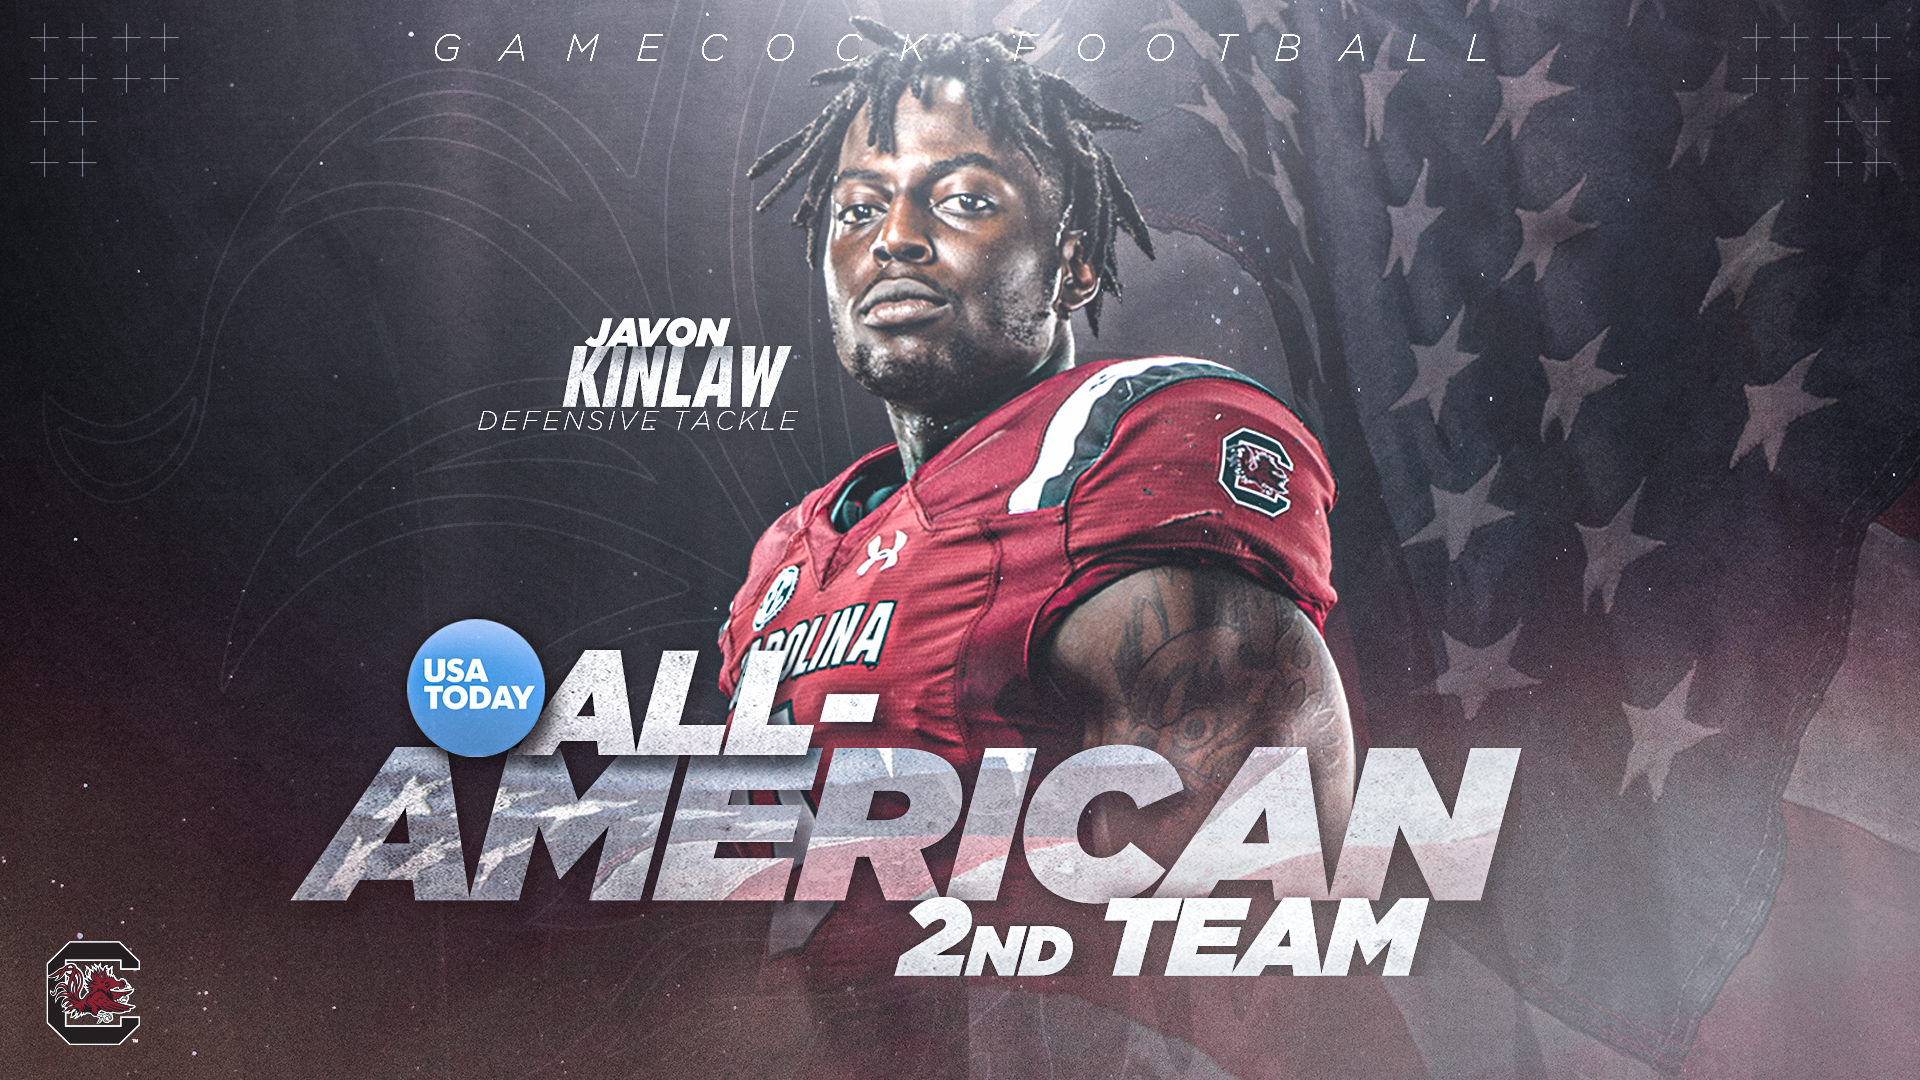 Kinlaw Named USA TODAY Second Team All-American